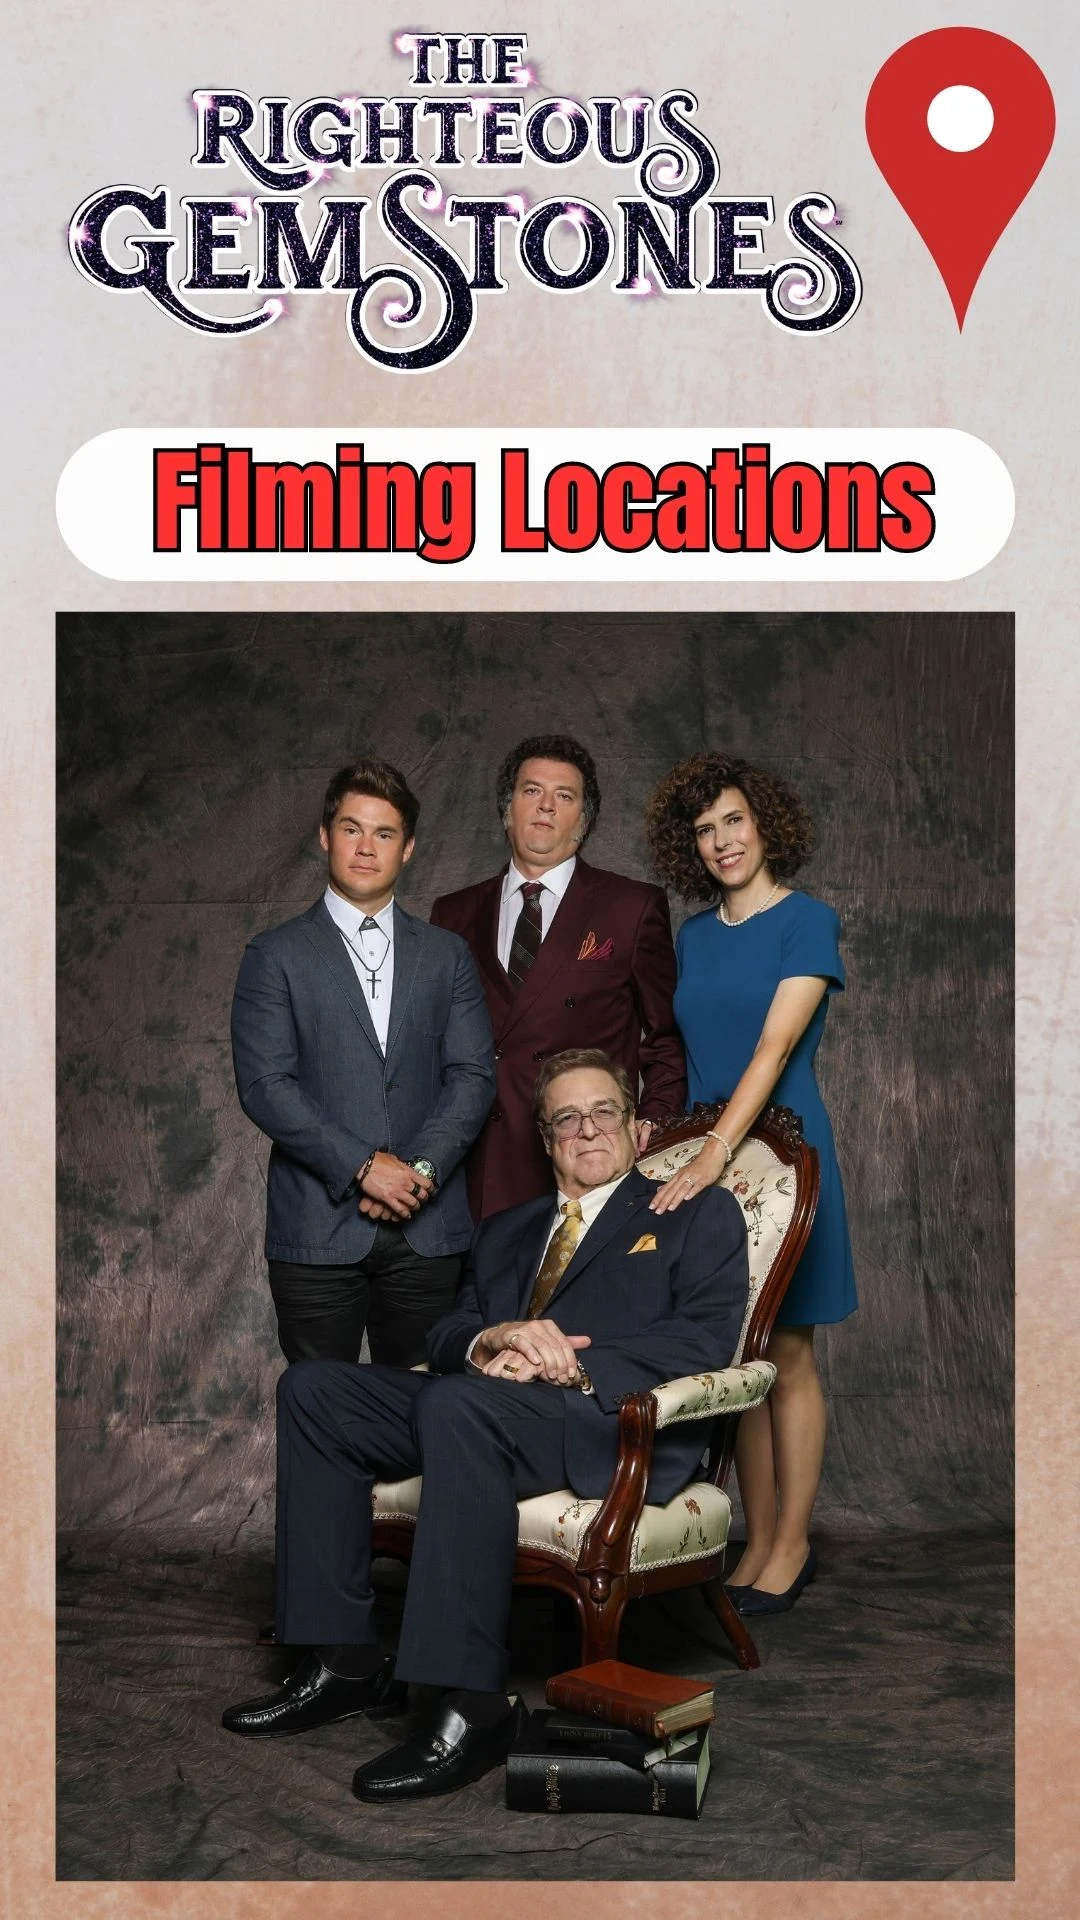 The Righteous Gemstones Filming Locations